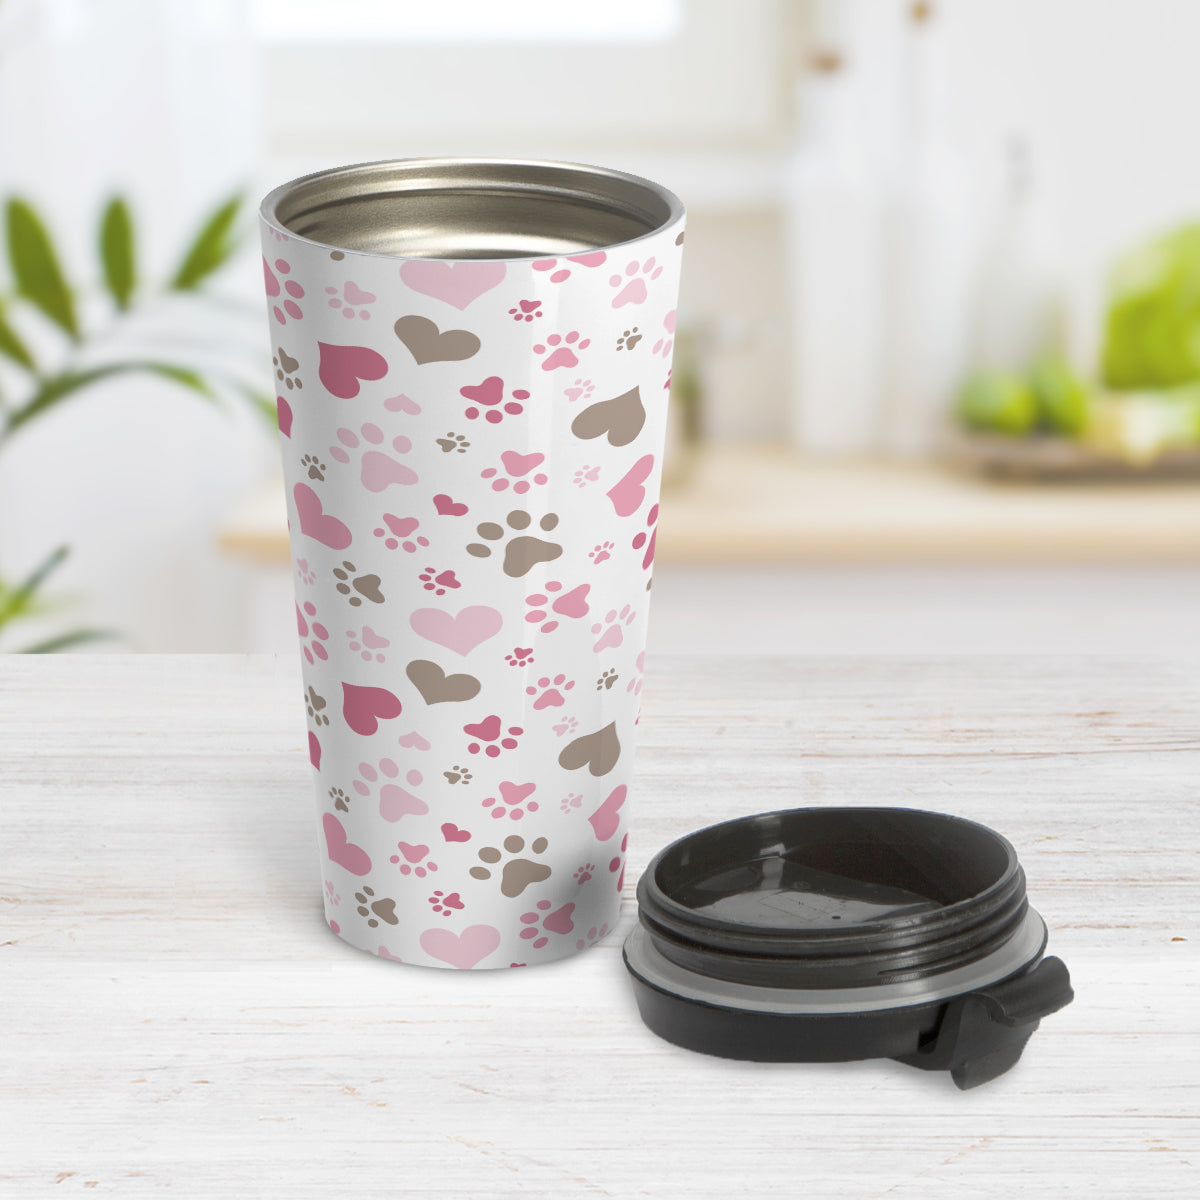 Pink and Hearts Paw Prints Travel Mug (15oz) at Amy's Coffee Mugs. A stainless steel travel mug designed with a pattern of hearts and paw prints in brown and different shades of pink that wraps around the mug. This travel mug is perfect for people love dogs and cute paw print designs. Photo shows the cup with the lid on the table beside it.